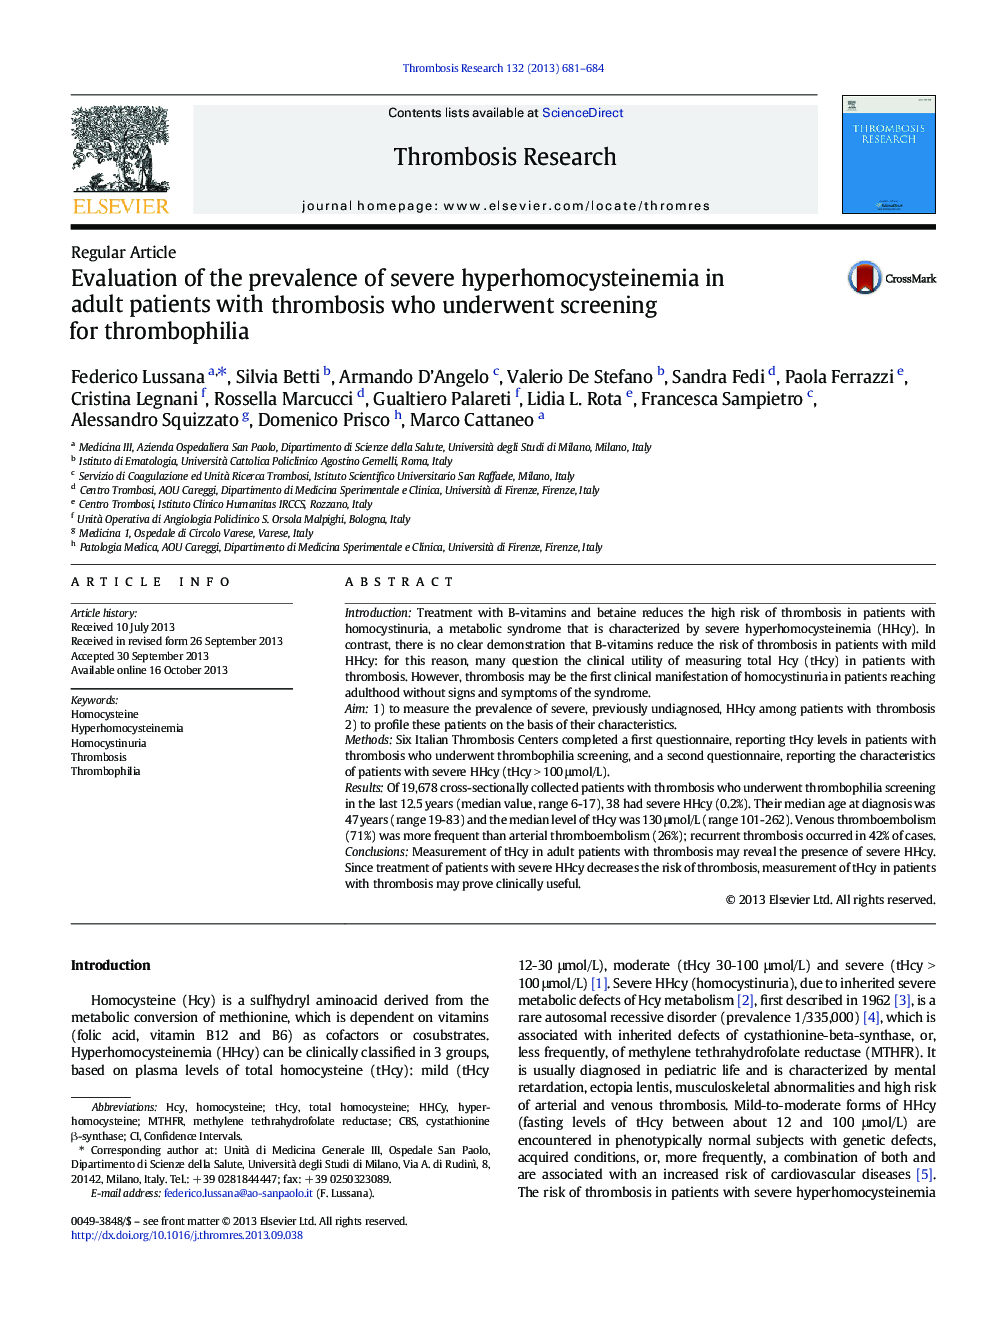 Evaluation of the prevalence of severe hyperhomocysteinemia in adult patients with thrombosis who underwent screening for thrombophilia